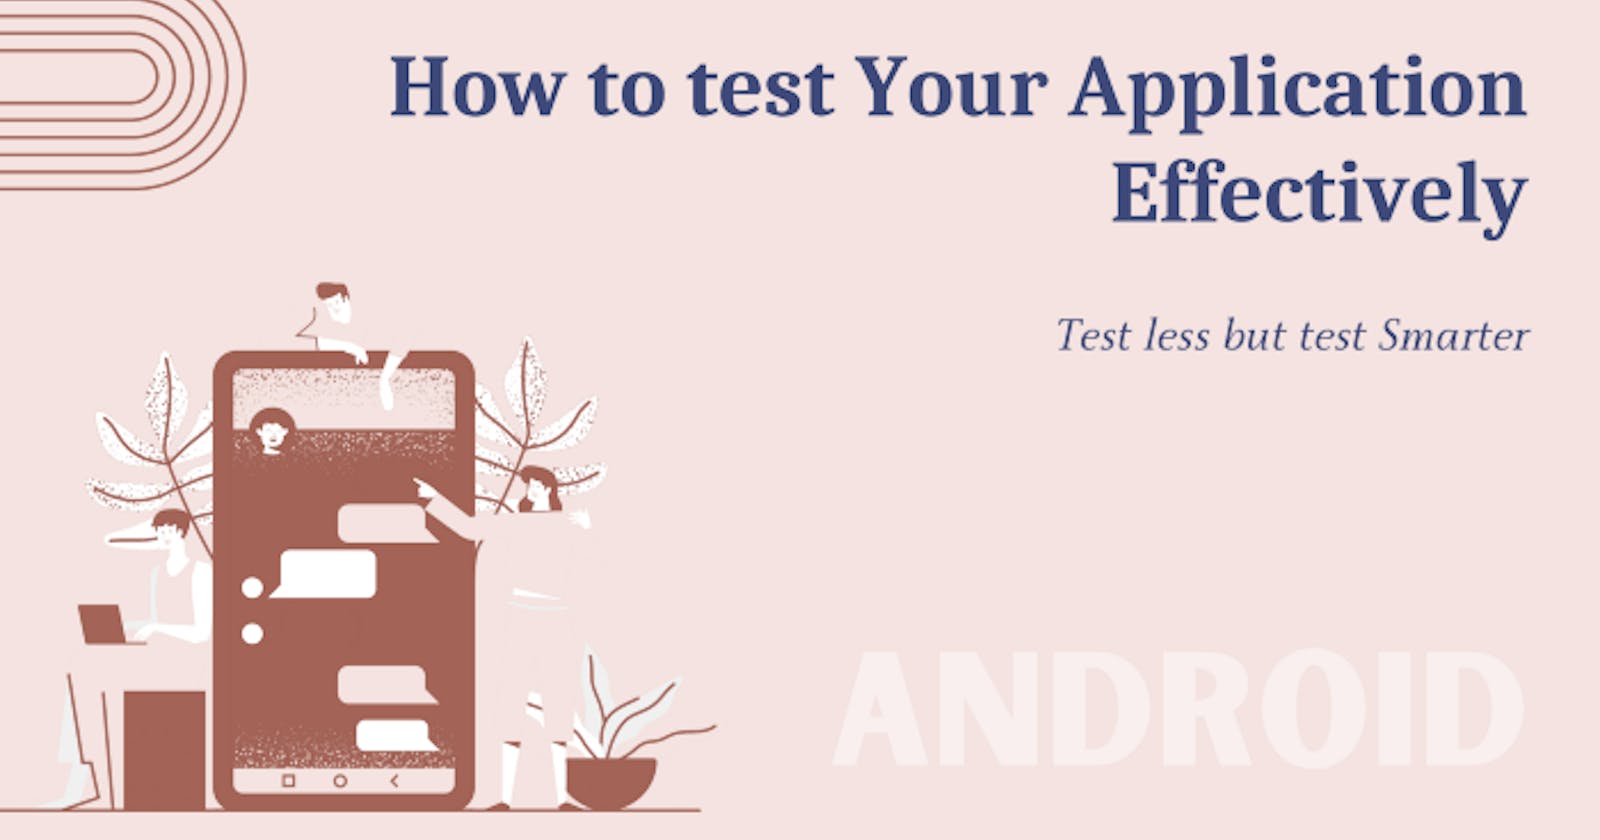 Android — Things to consider when testing an application